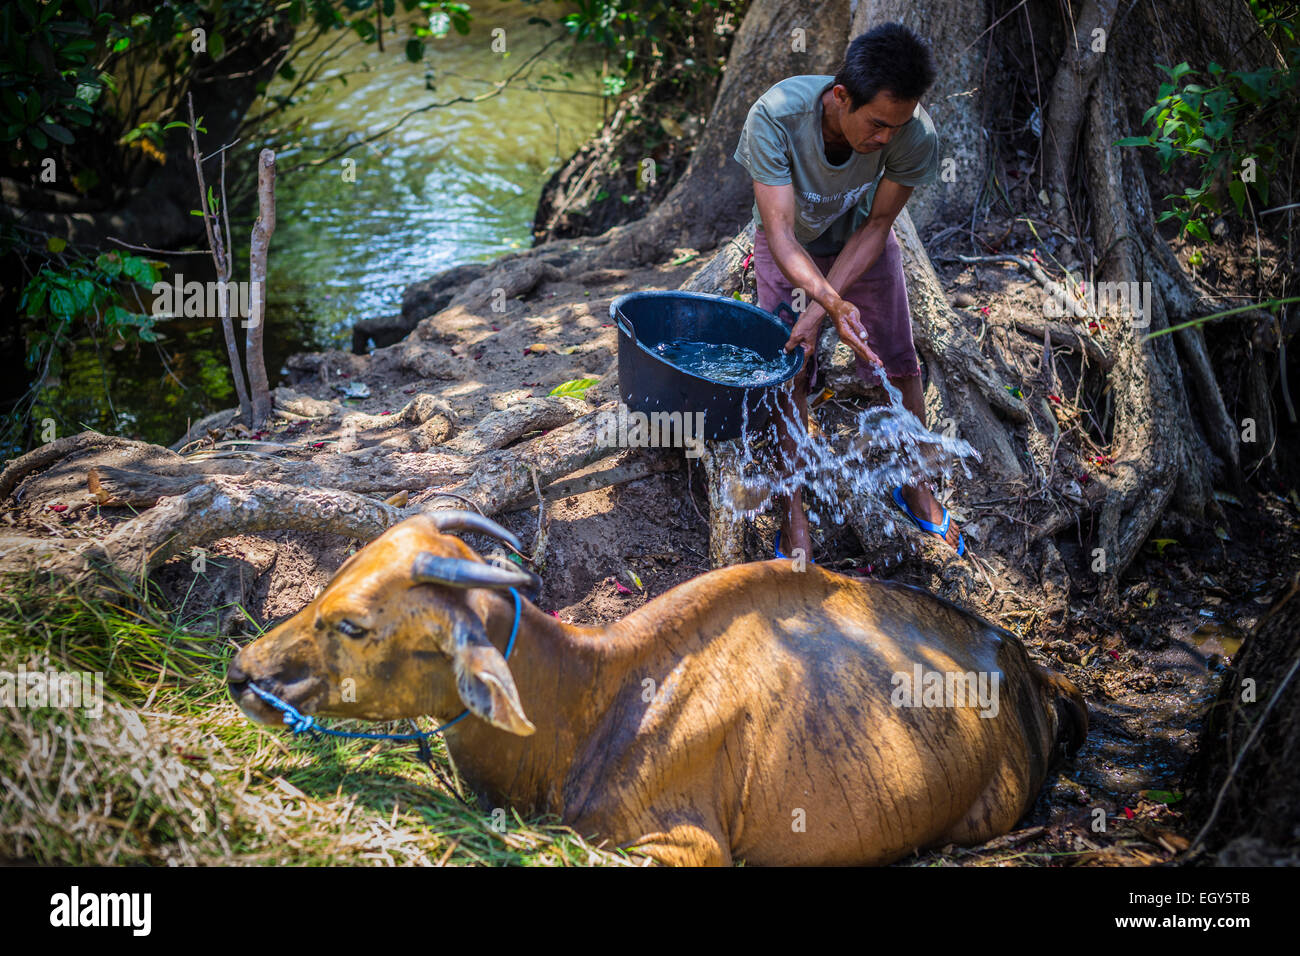 Farmer help his cow at hot sunny day, Bali, Indonesia. Stock Photo